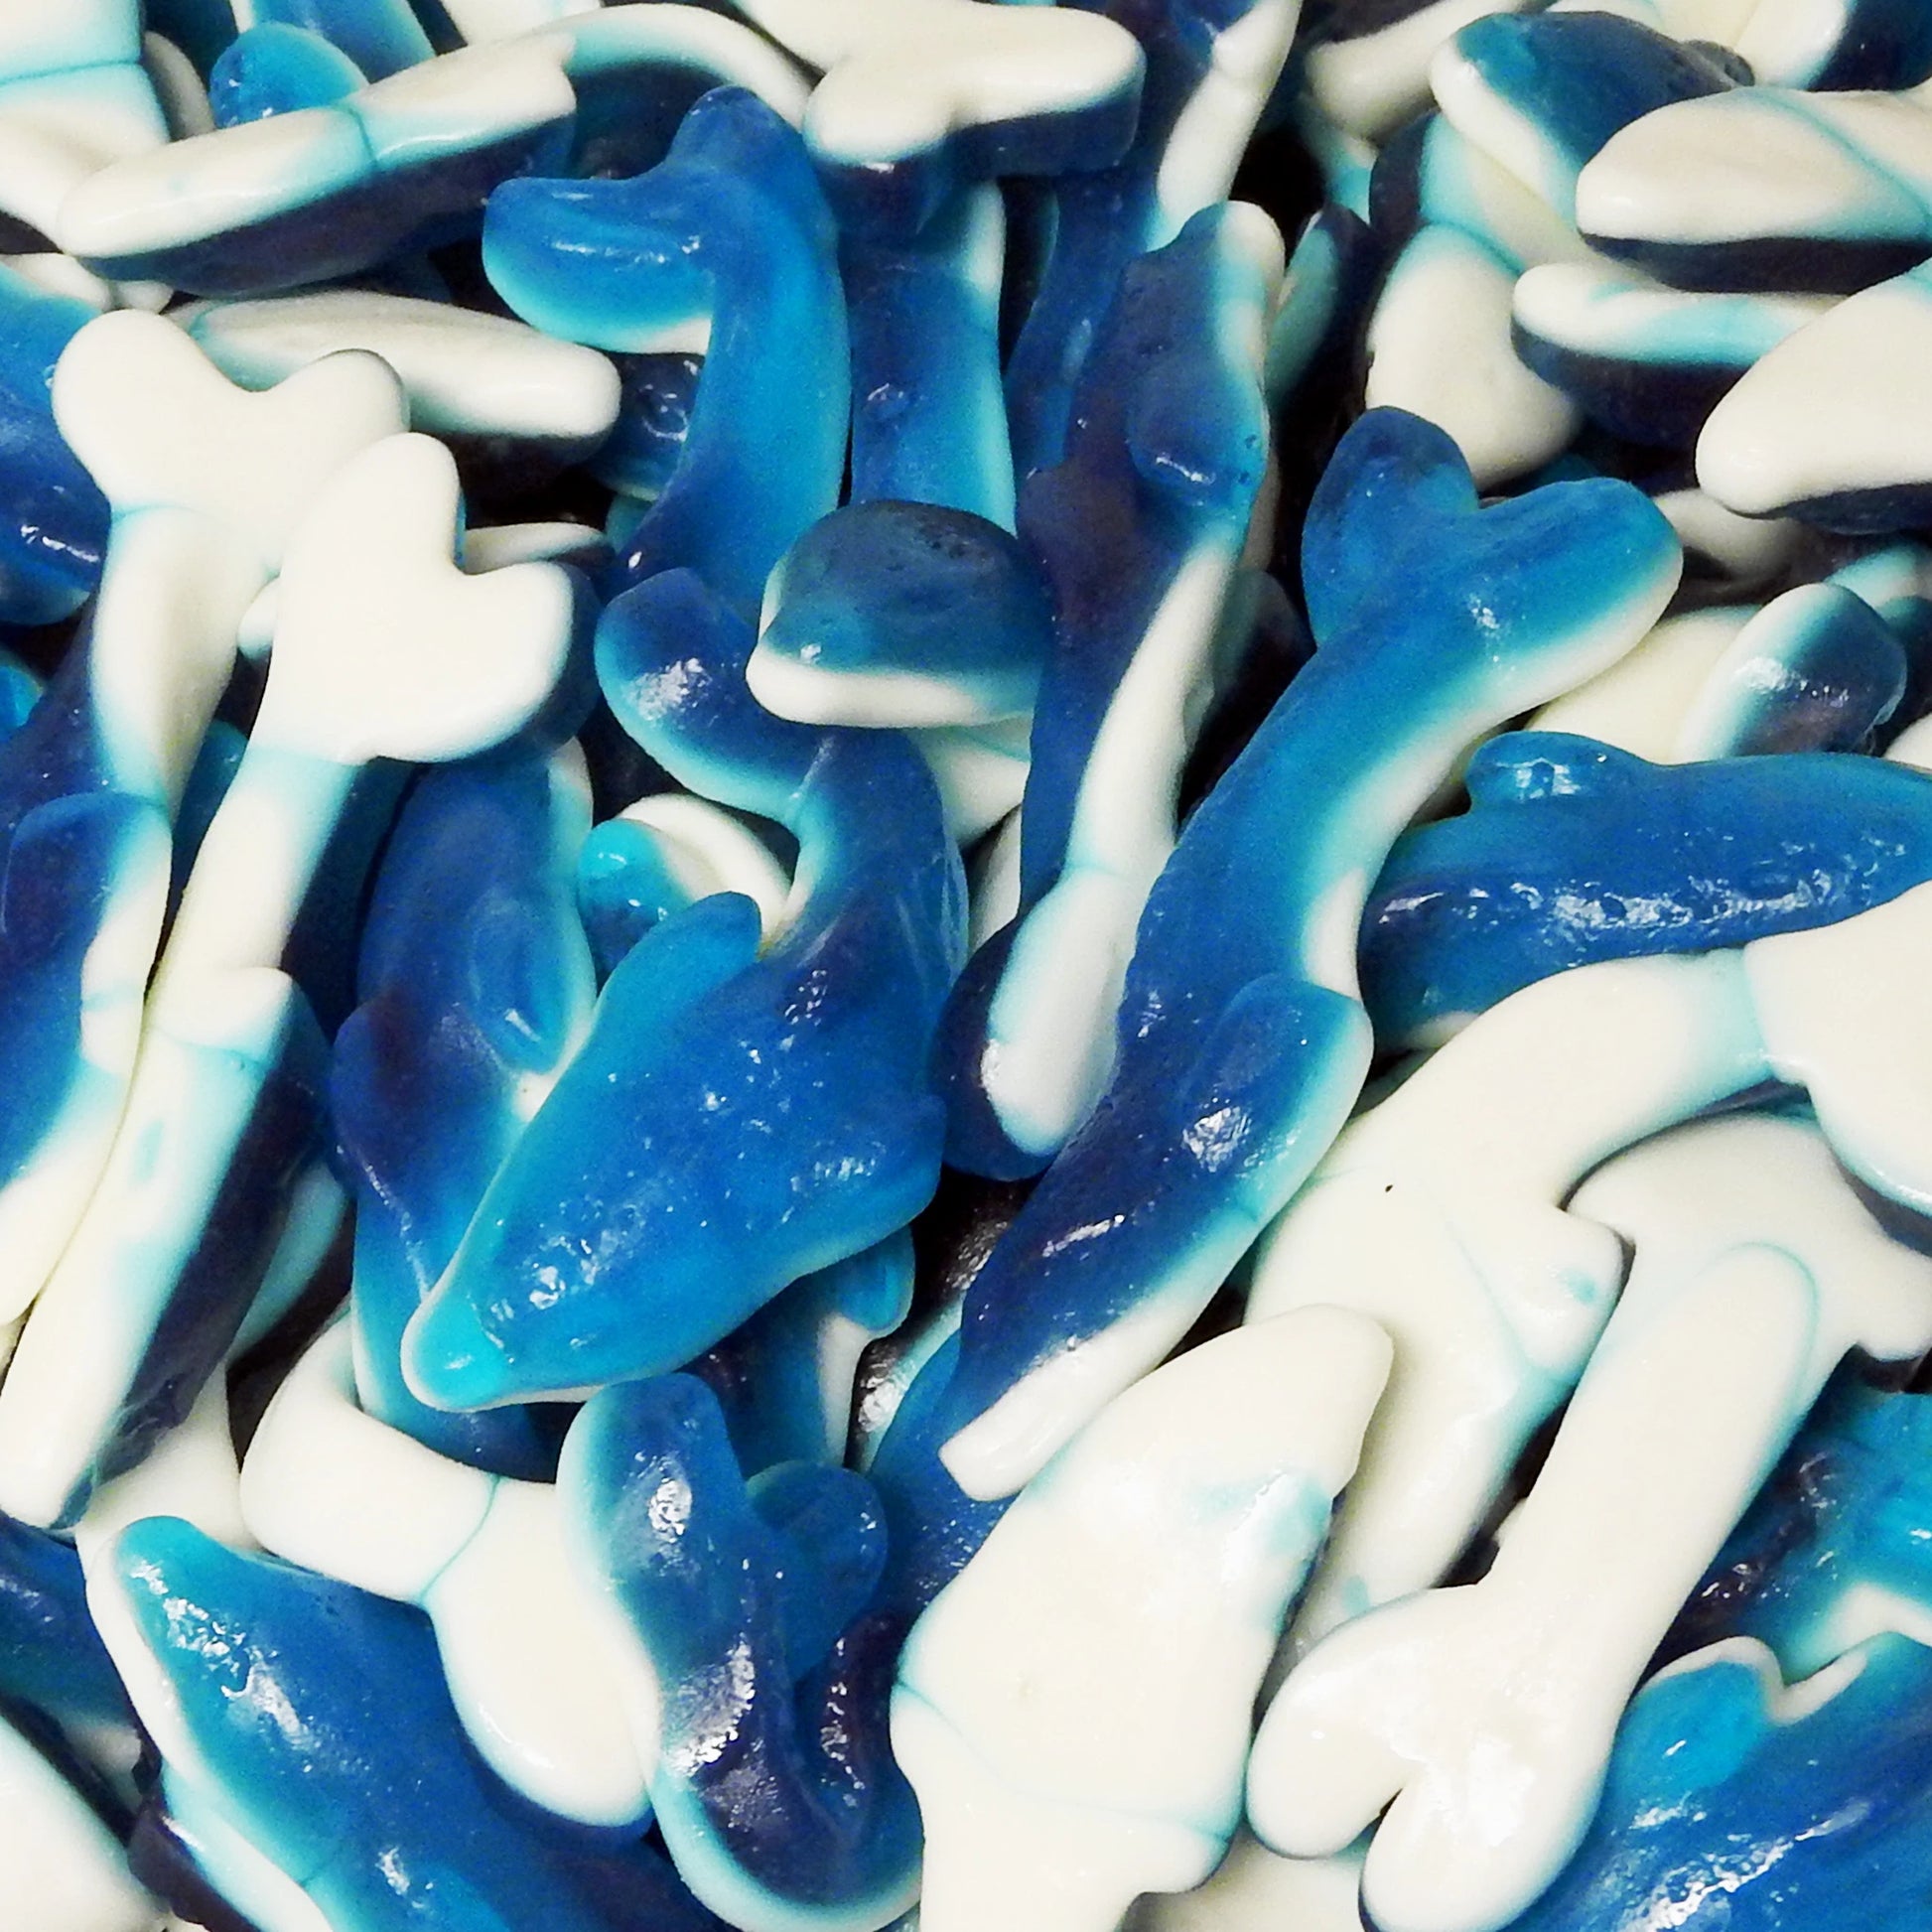 Giant Jelly Dolphins - Retro Sweets at The Sweetie Jar